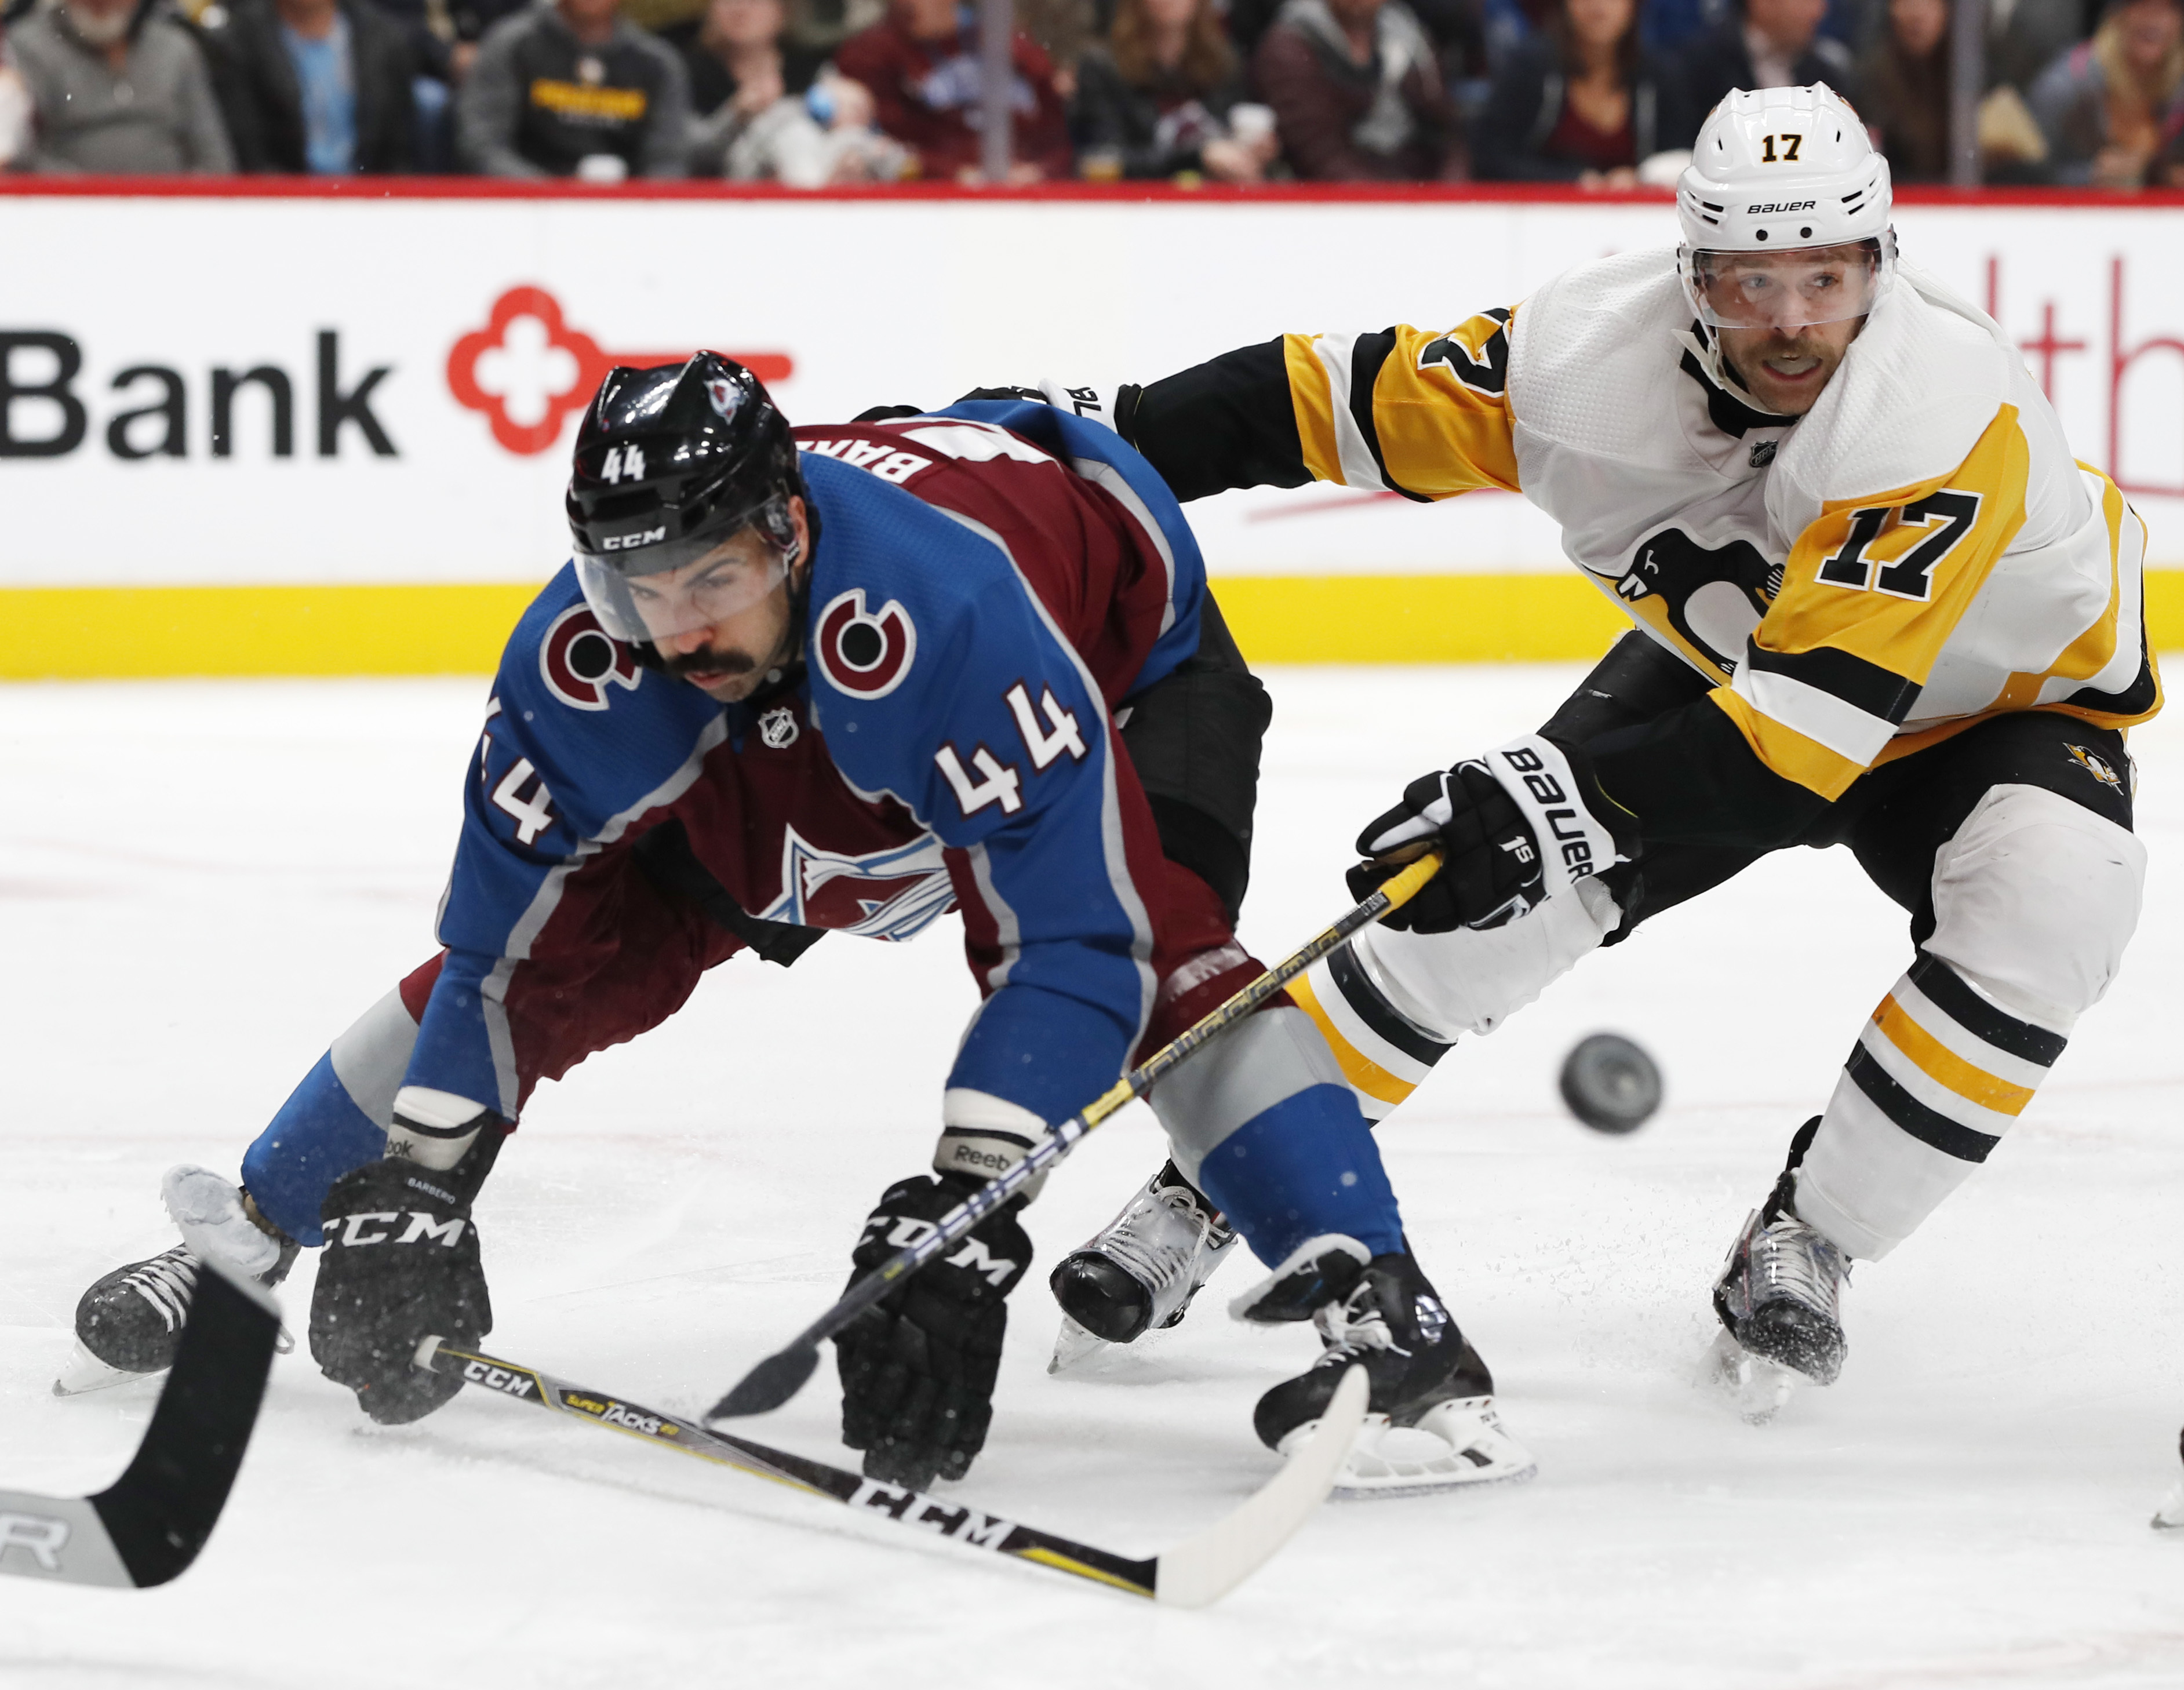 Avs overcome Crosby’s natural hat trick, beat Pens 6-3